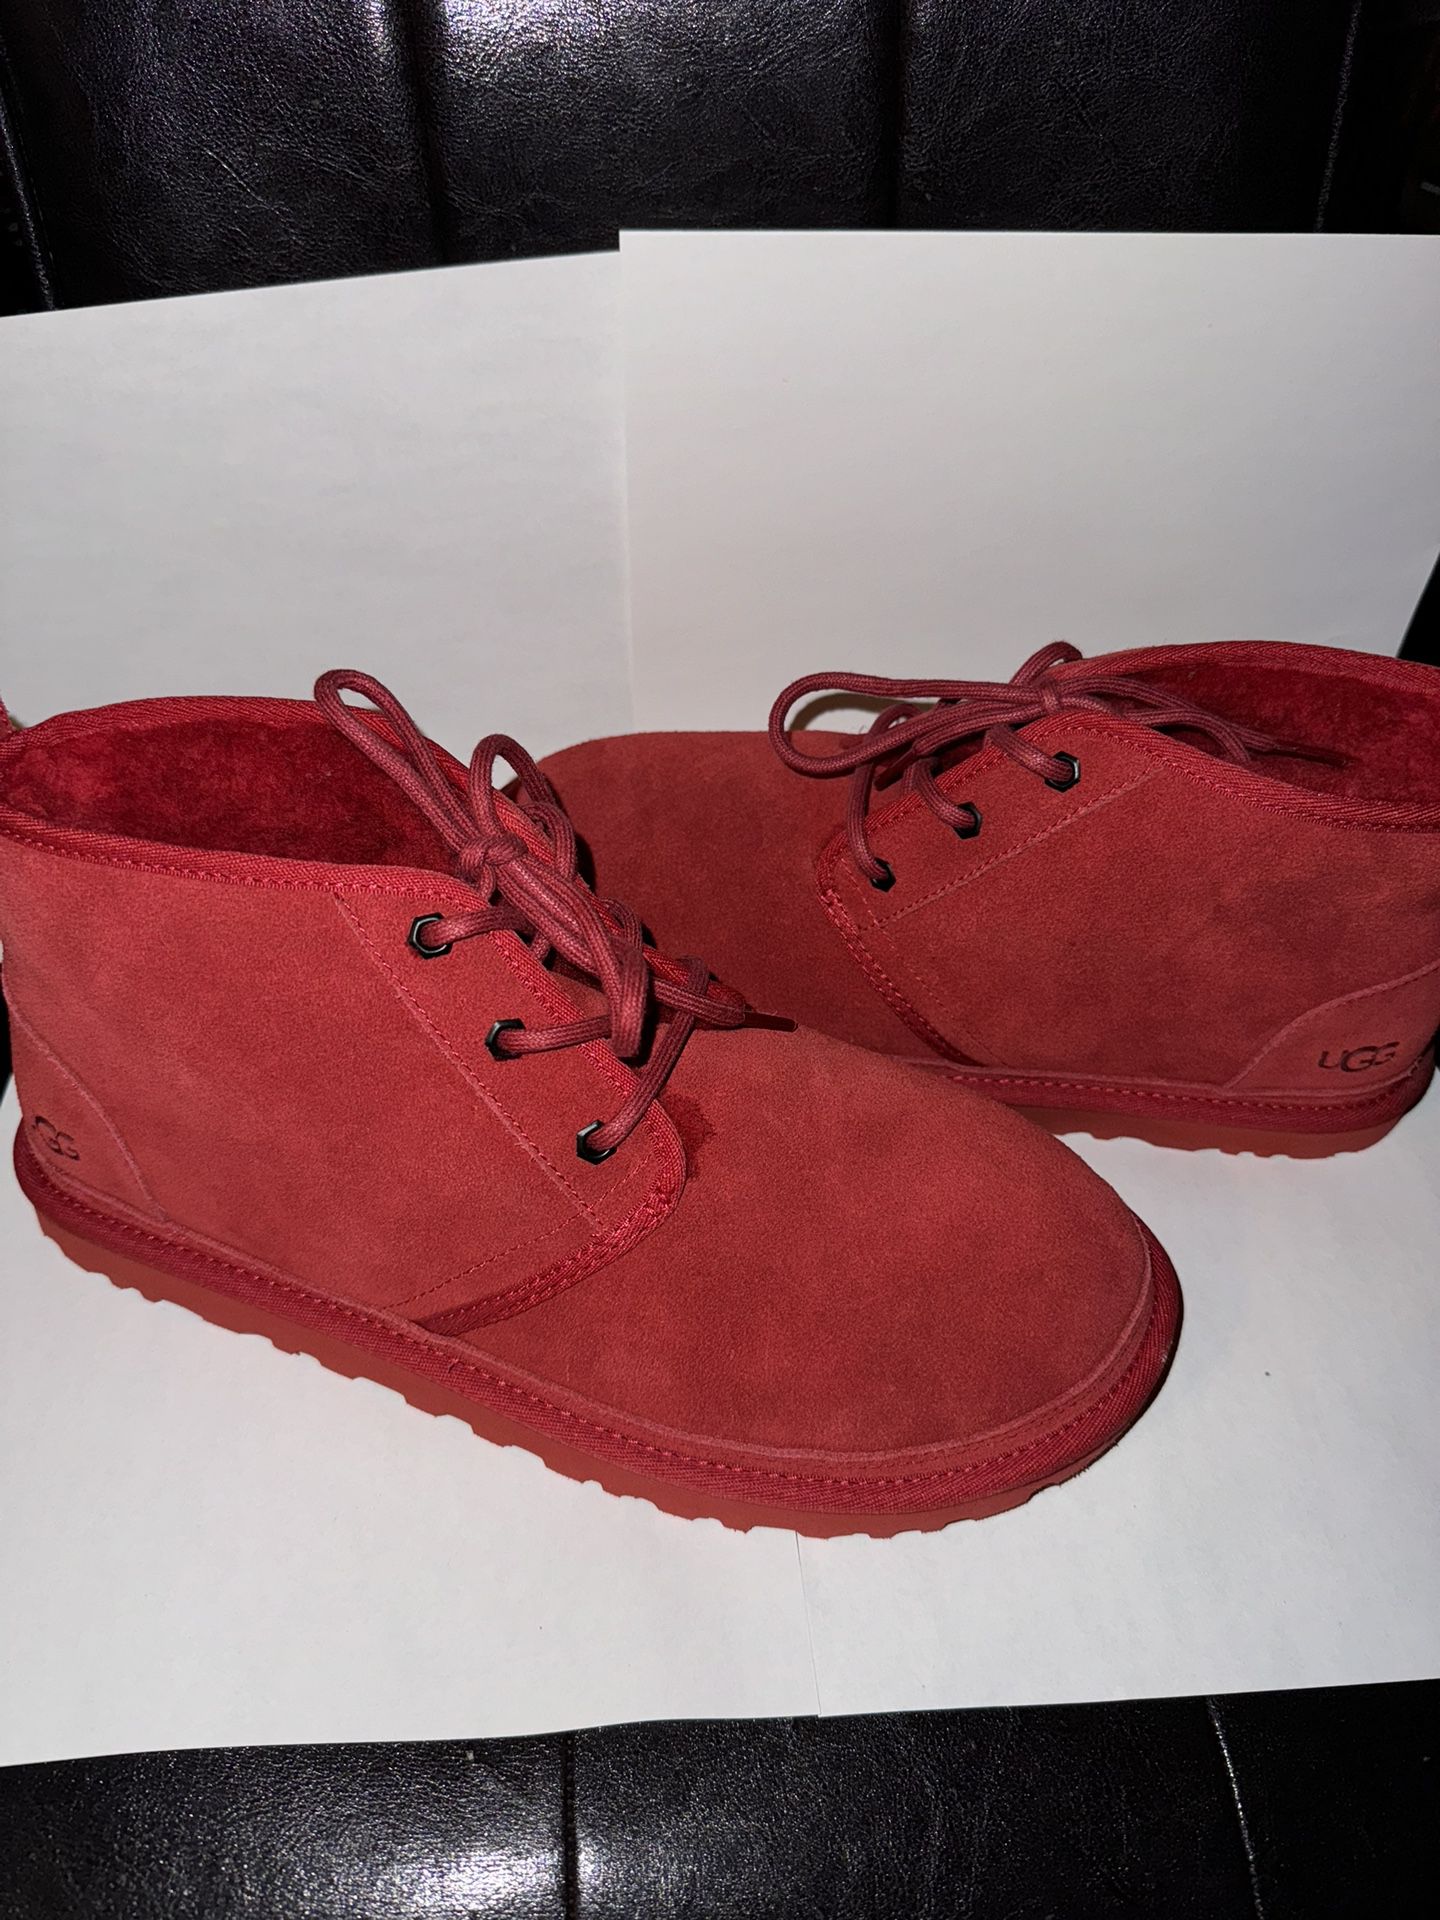 Red Uggs Size 10